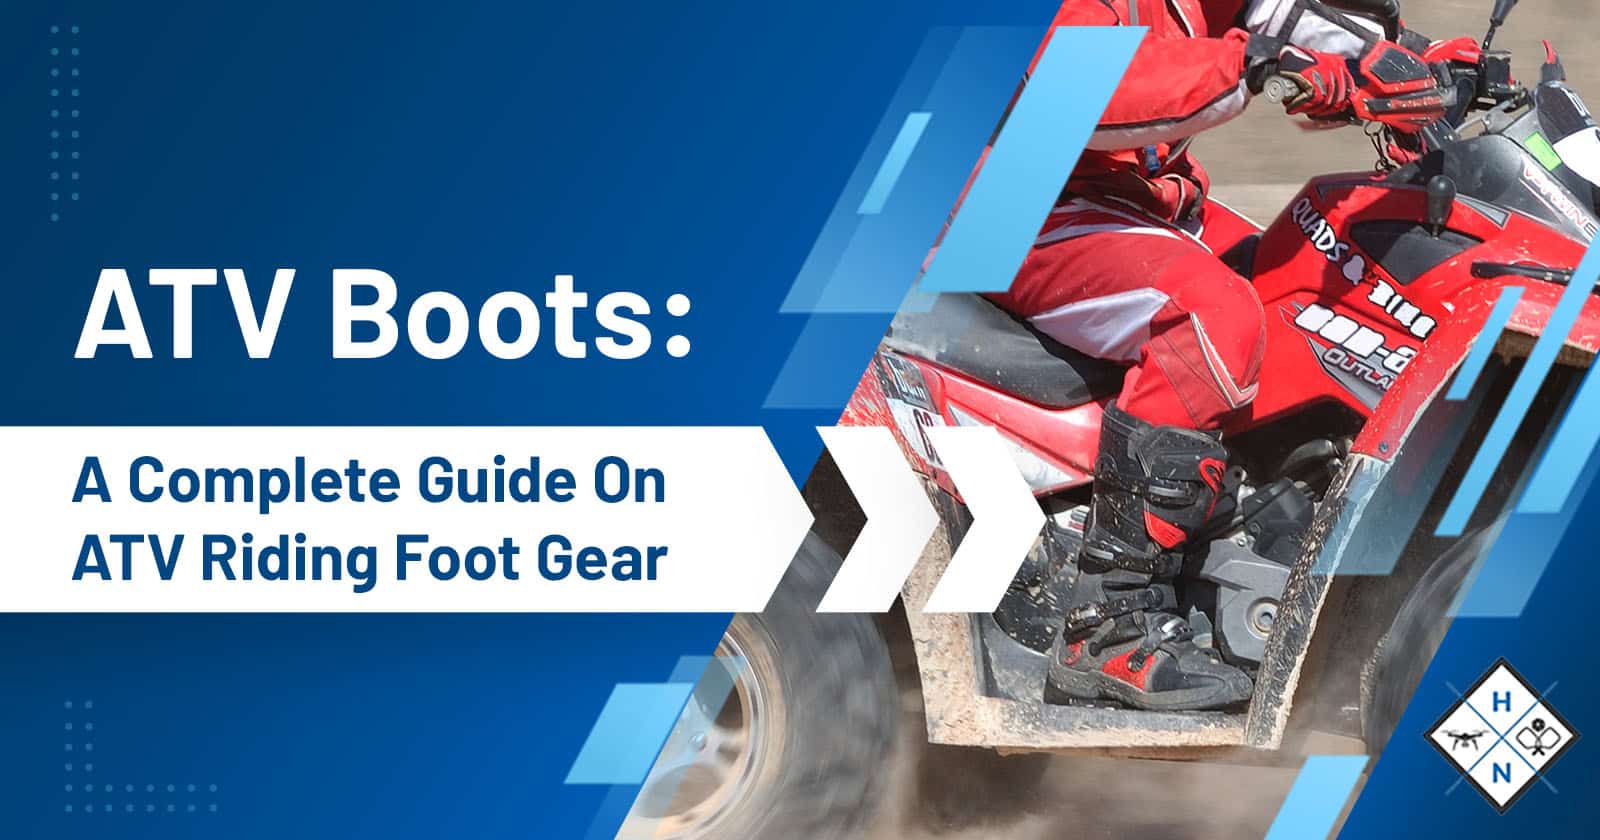 ATV Boots: A Complete Guide On ATV Riding Foot Gear